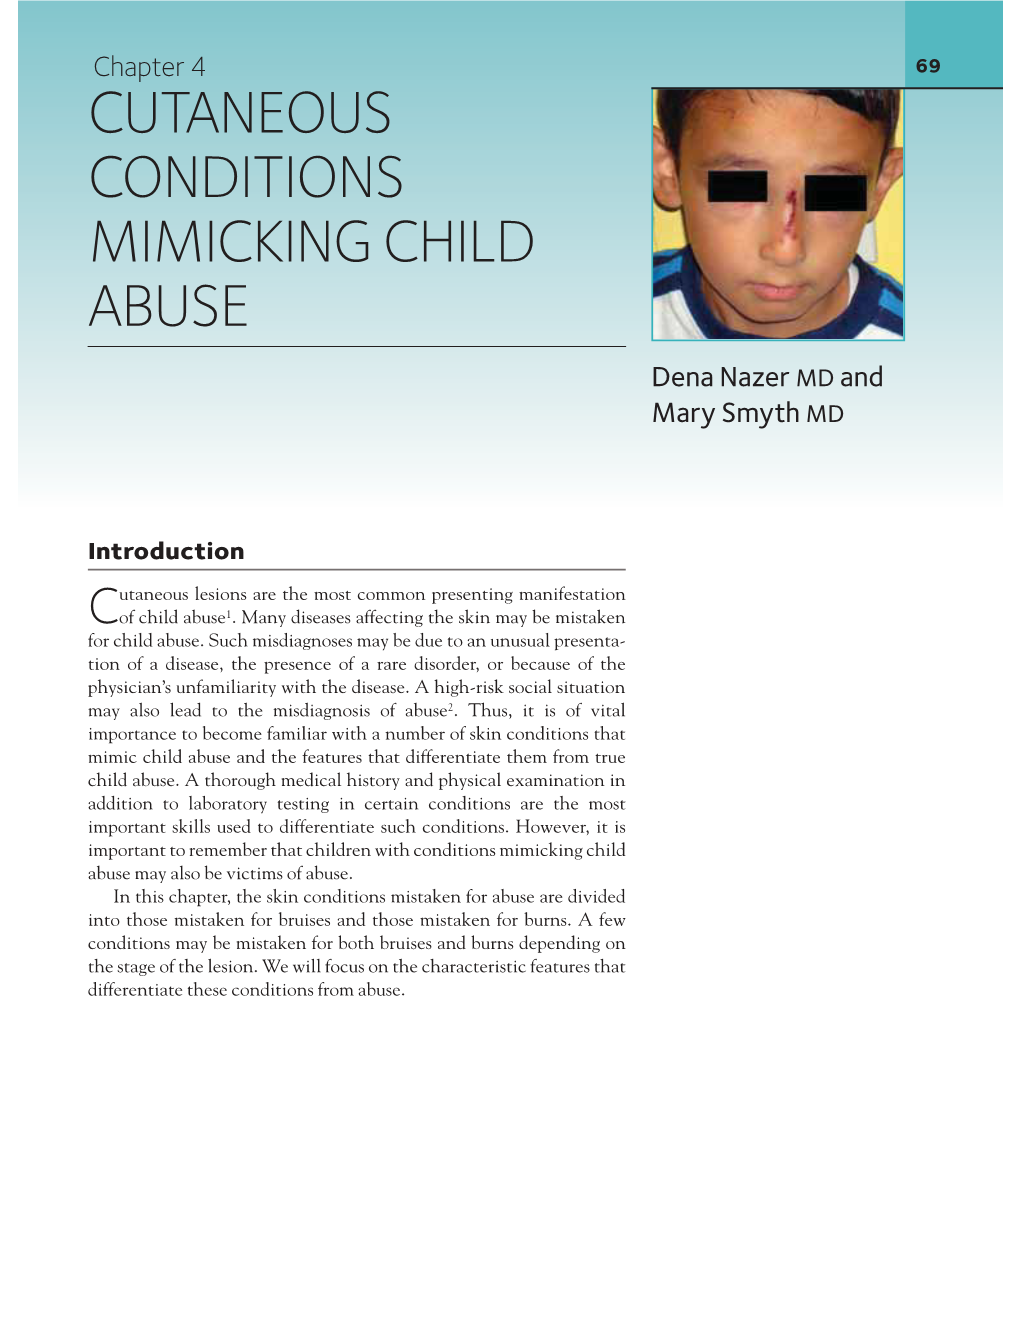 Cutaneous Conditions Mimicking Child Abuse